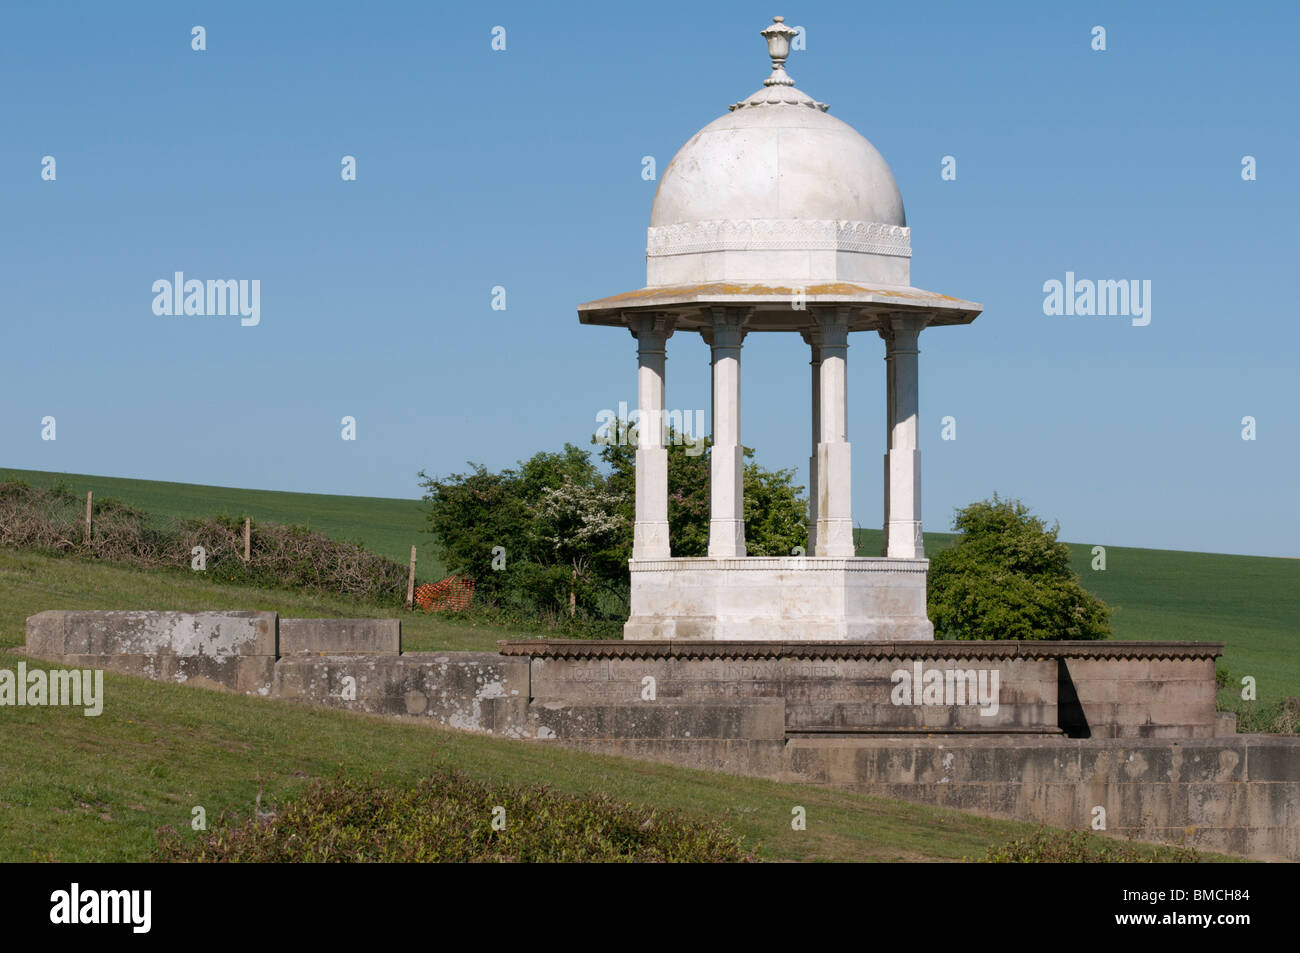 ENGLAND, UNITED KINGDOM - The Chattri is dedicated to the memory of Indian soldiers who fought in the First World War. Stock Photo